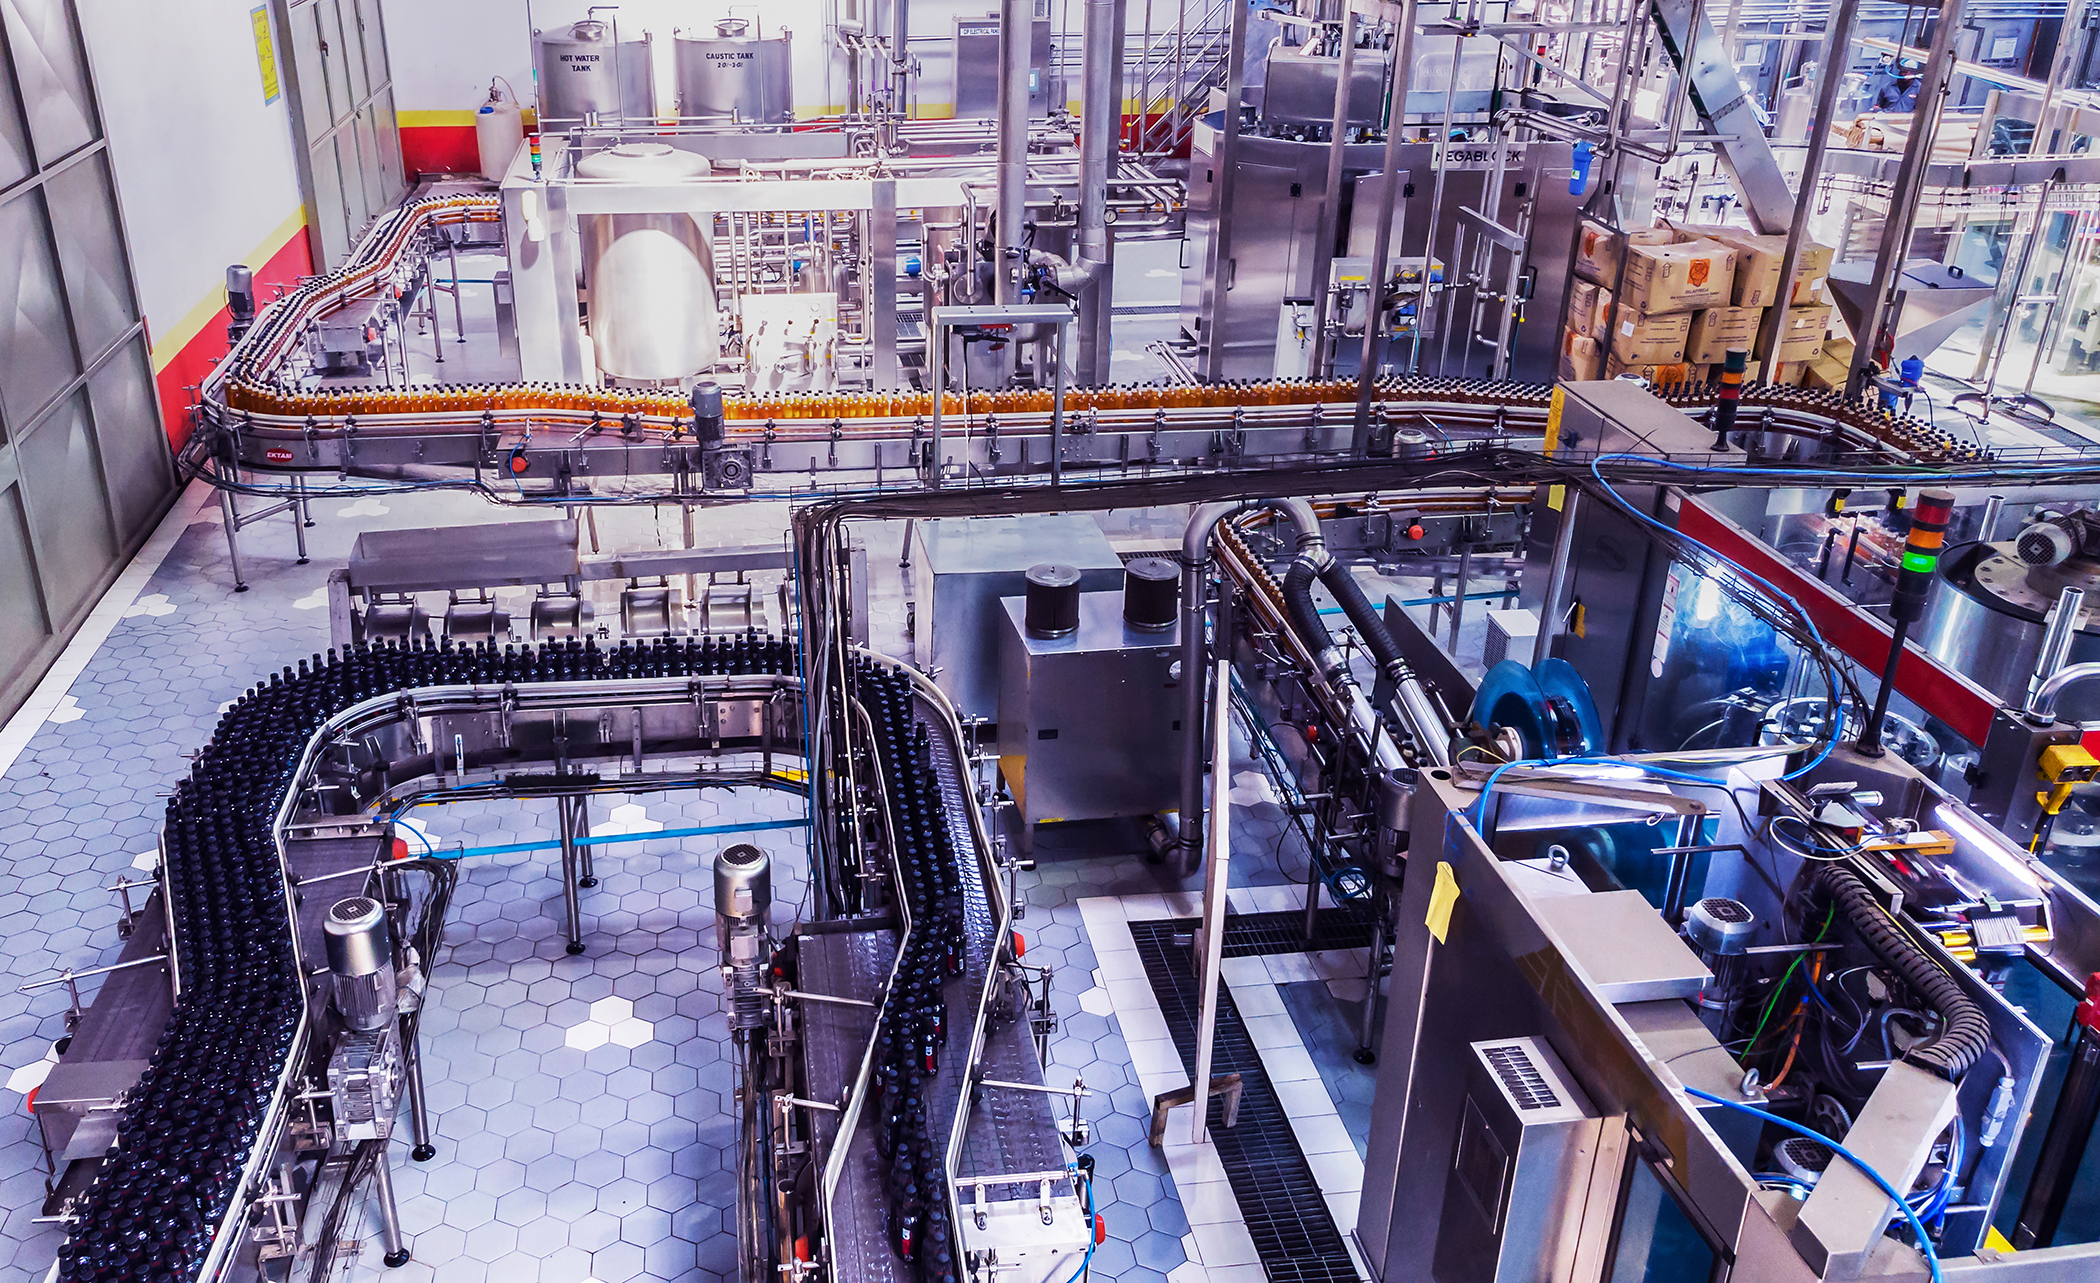 The Smart Factories of the future are highly productive, flexible and responsive because of their ability to leverage the power of data, which can offer a unique understanding of what is happening on the factory floor in real-time. (©istock/ GCShutter)